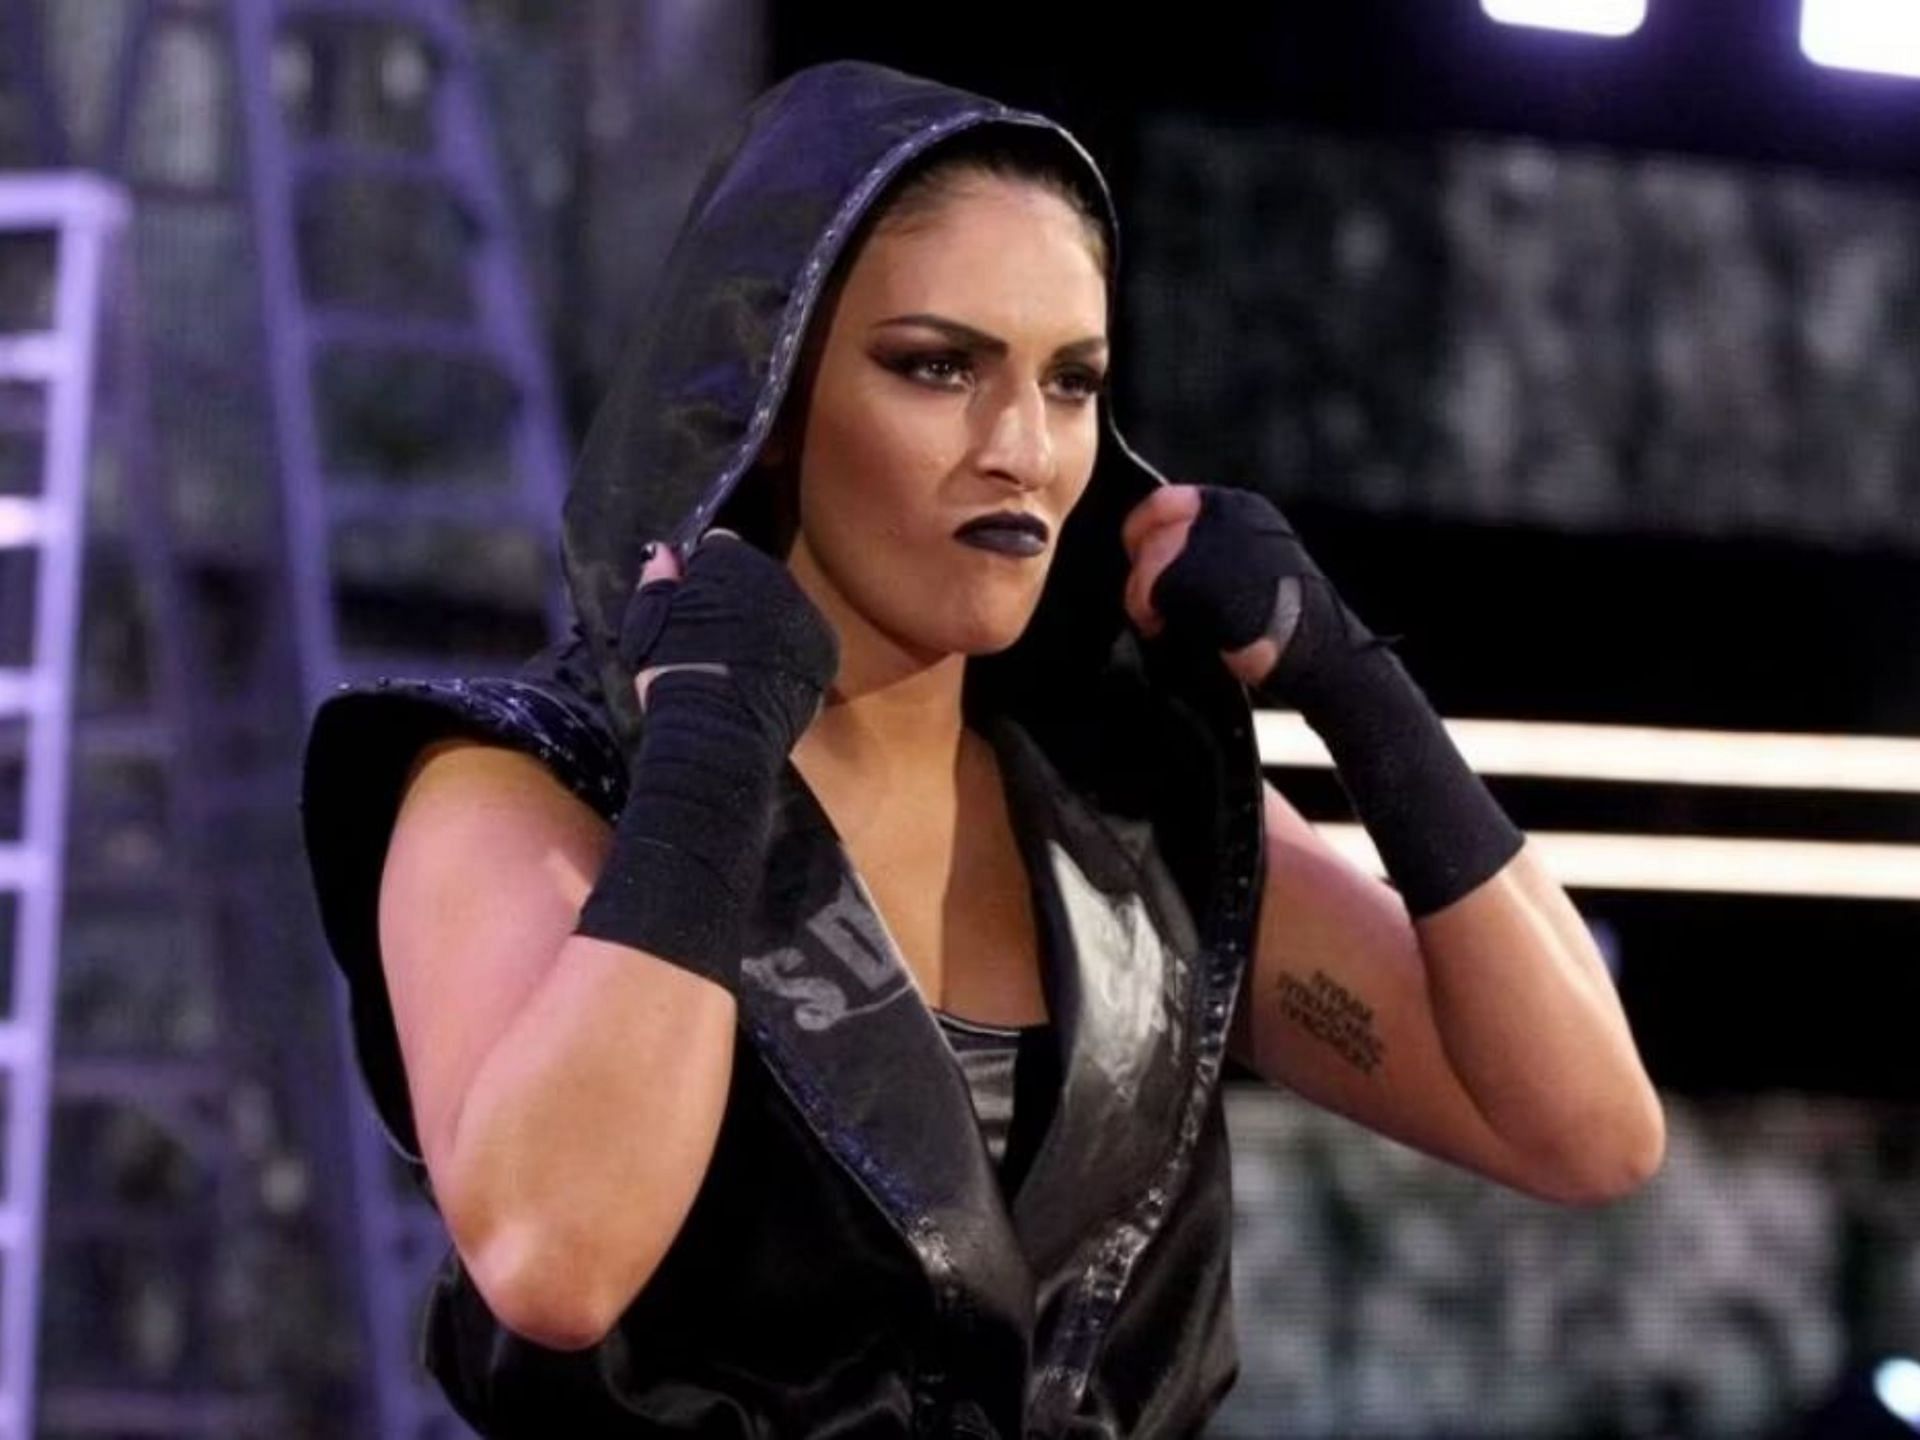 Sonya Deville could join her best friend, Mandy Rose, in NXT 2.0